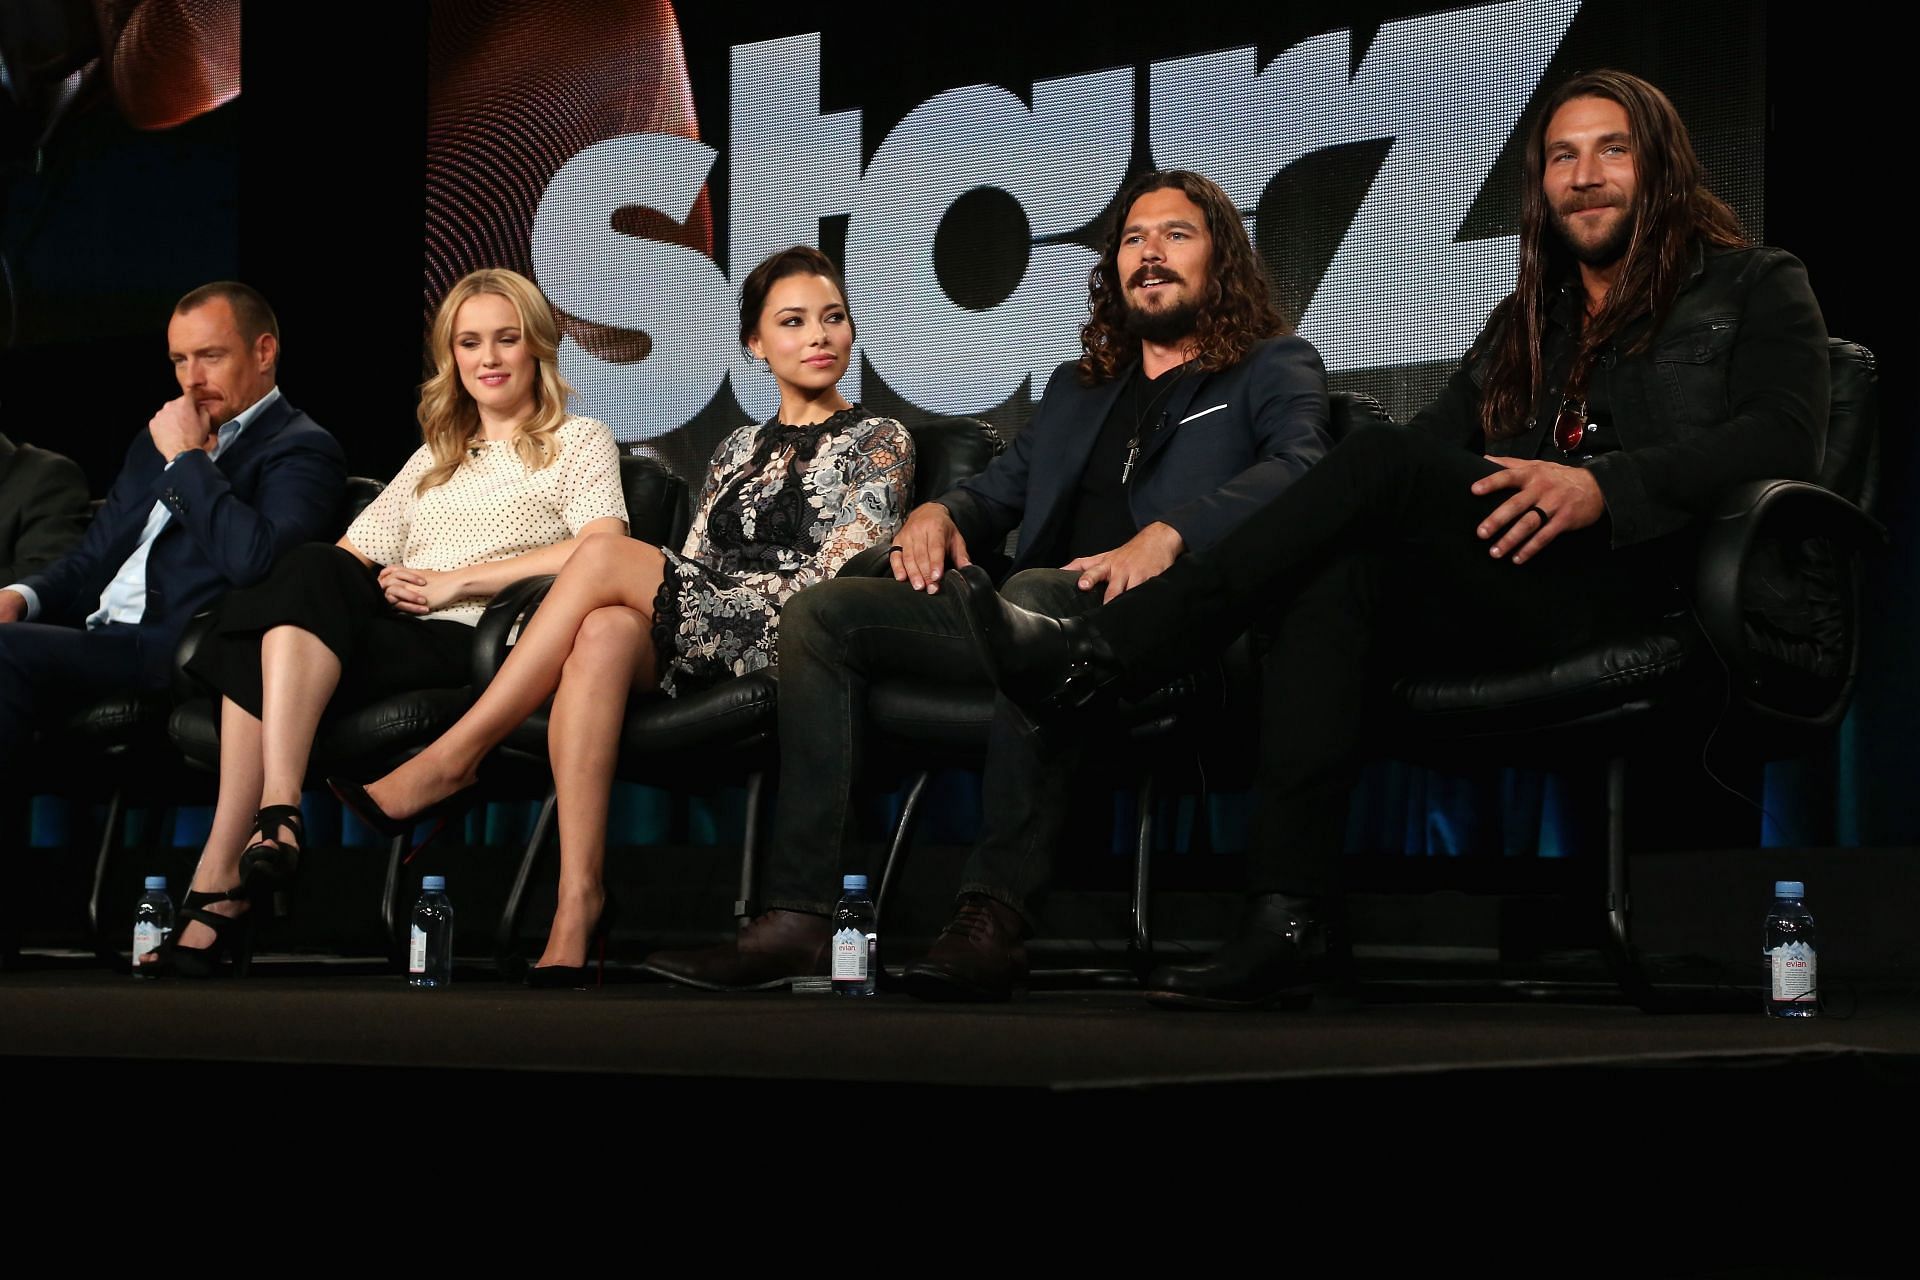 The cast of &#039;Black Sails&#039; at the 2015 Winter TCA Tour (via Getty/Frederick M. Brown)